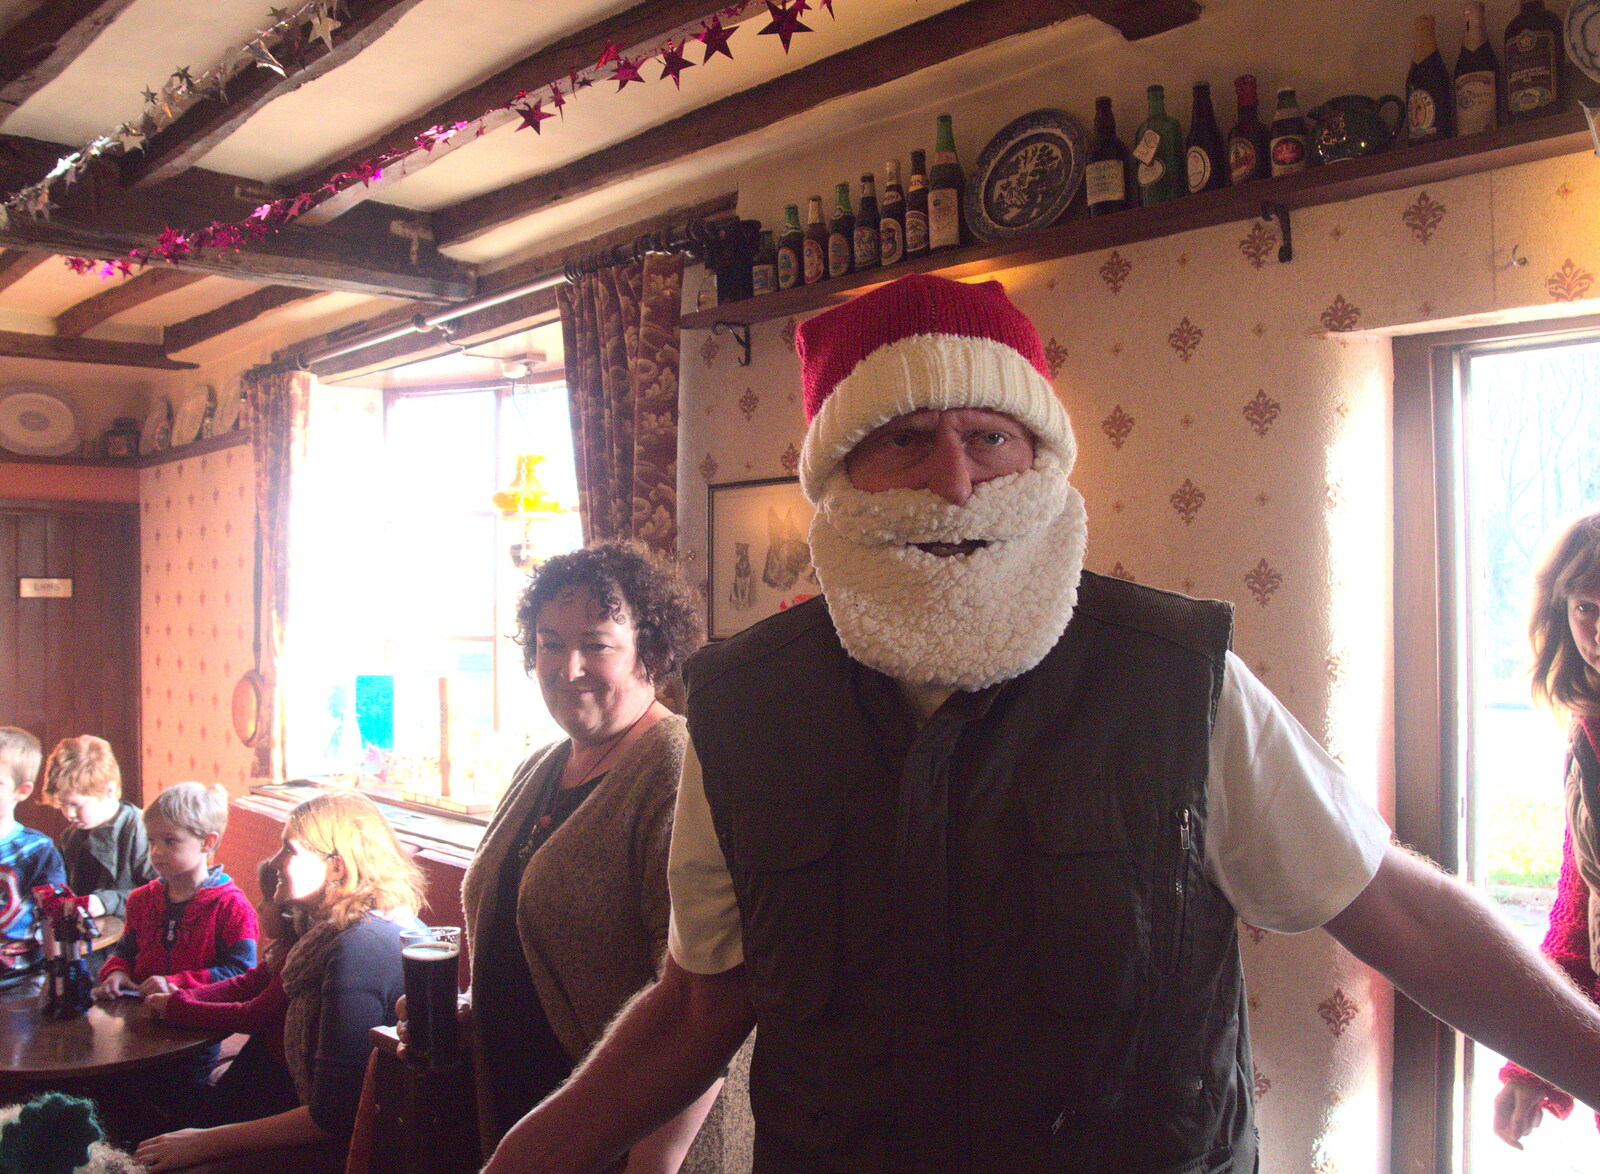 Santa - aka Wavy - comes in from Christmas and All That, Brome, Suffolk - 25th December 2016